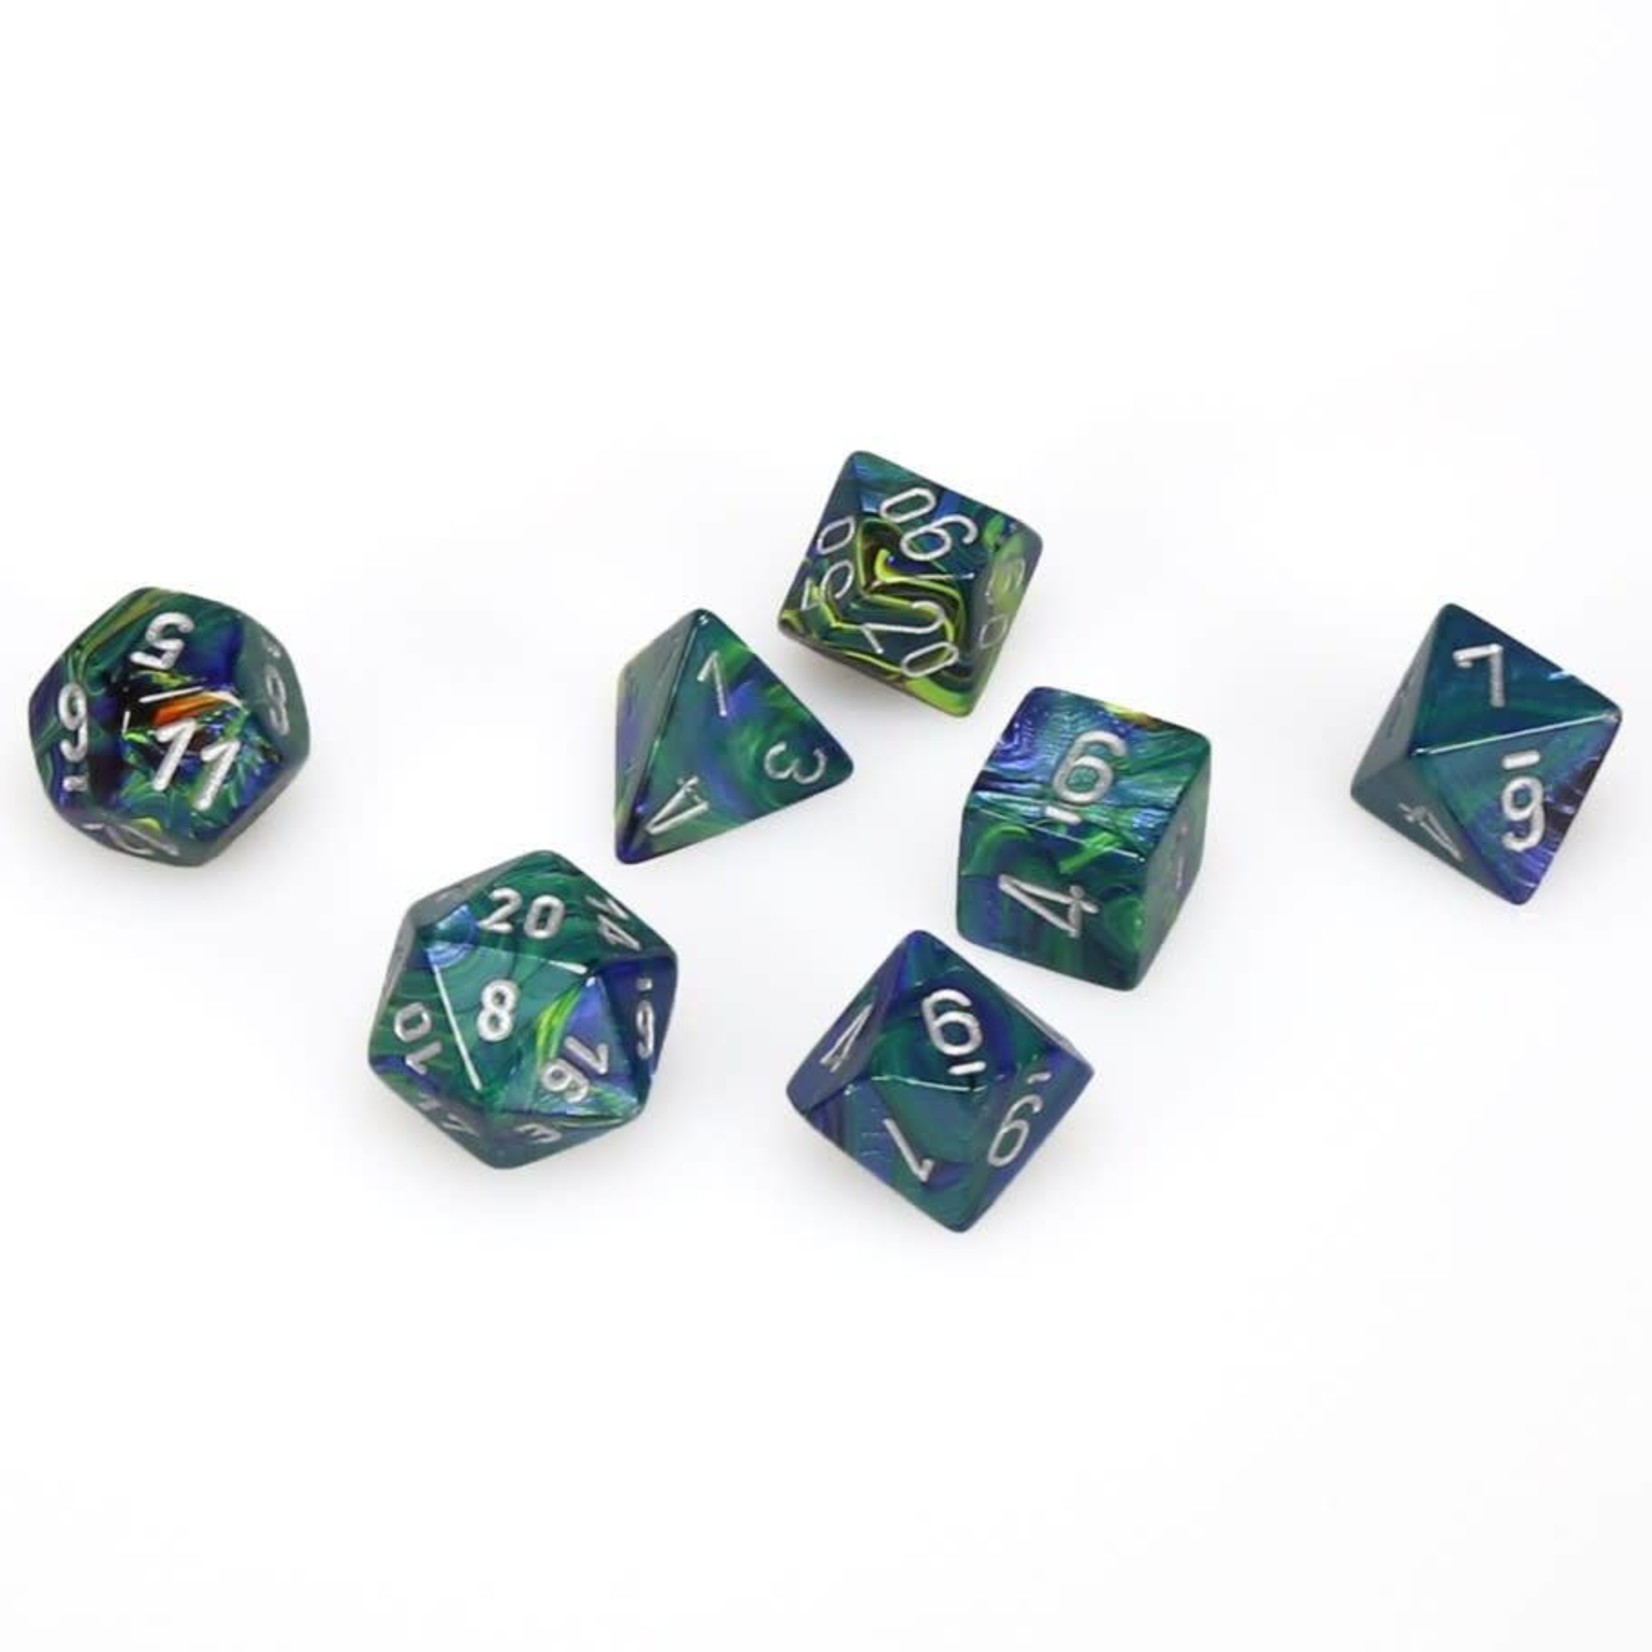 Chessex Chessex Festive Menagerie Green with Silver Polyhedral 7 die set